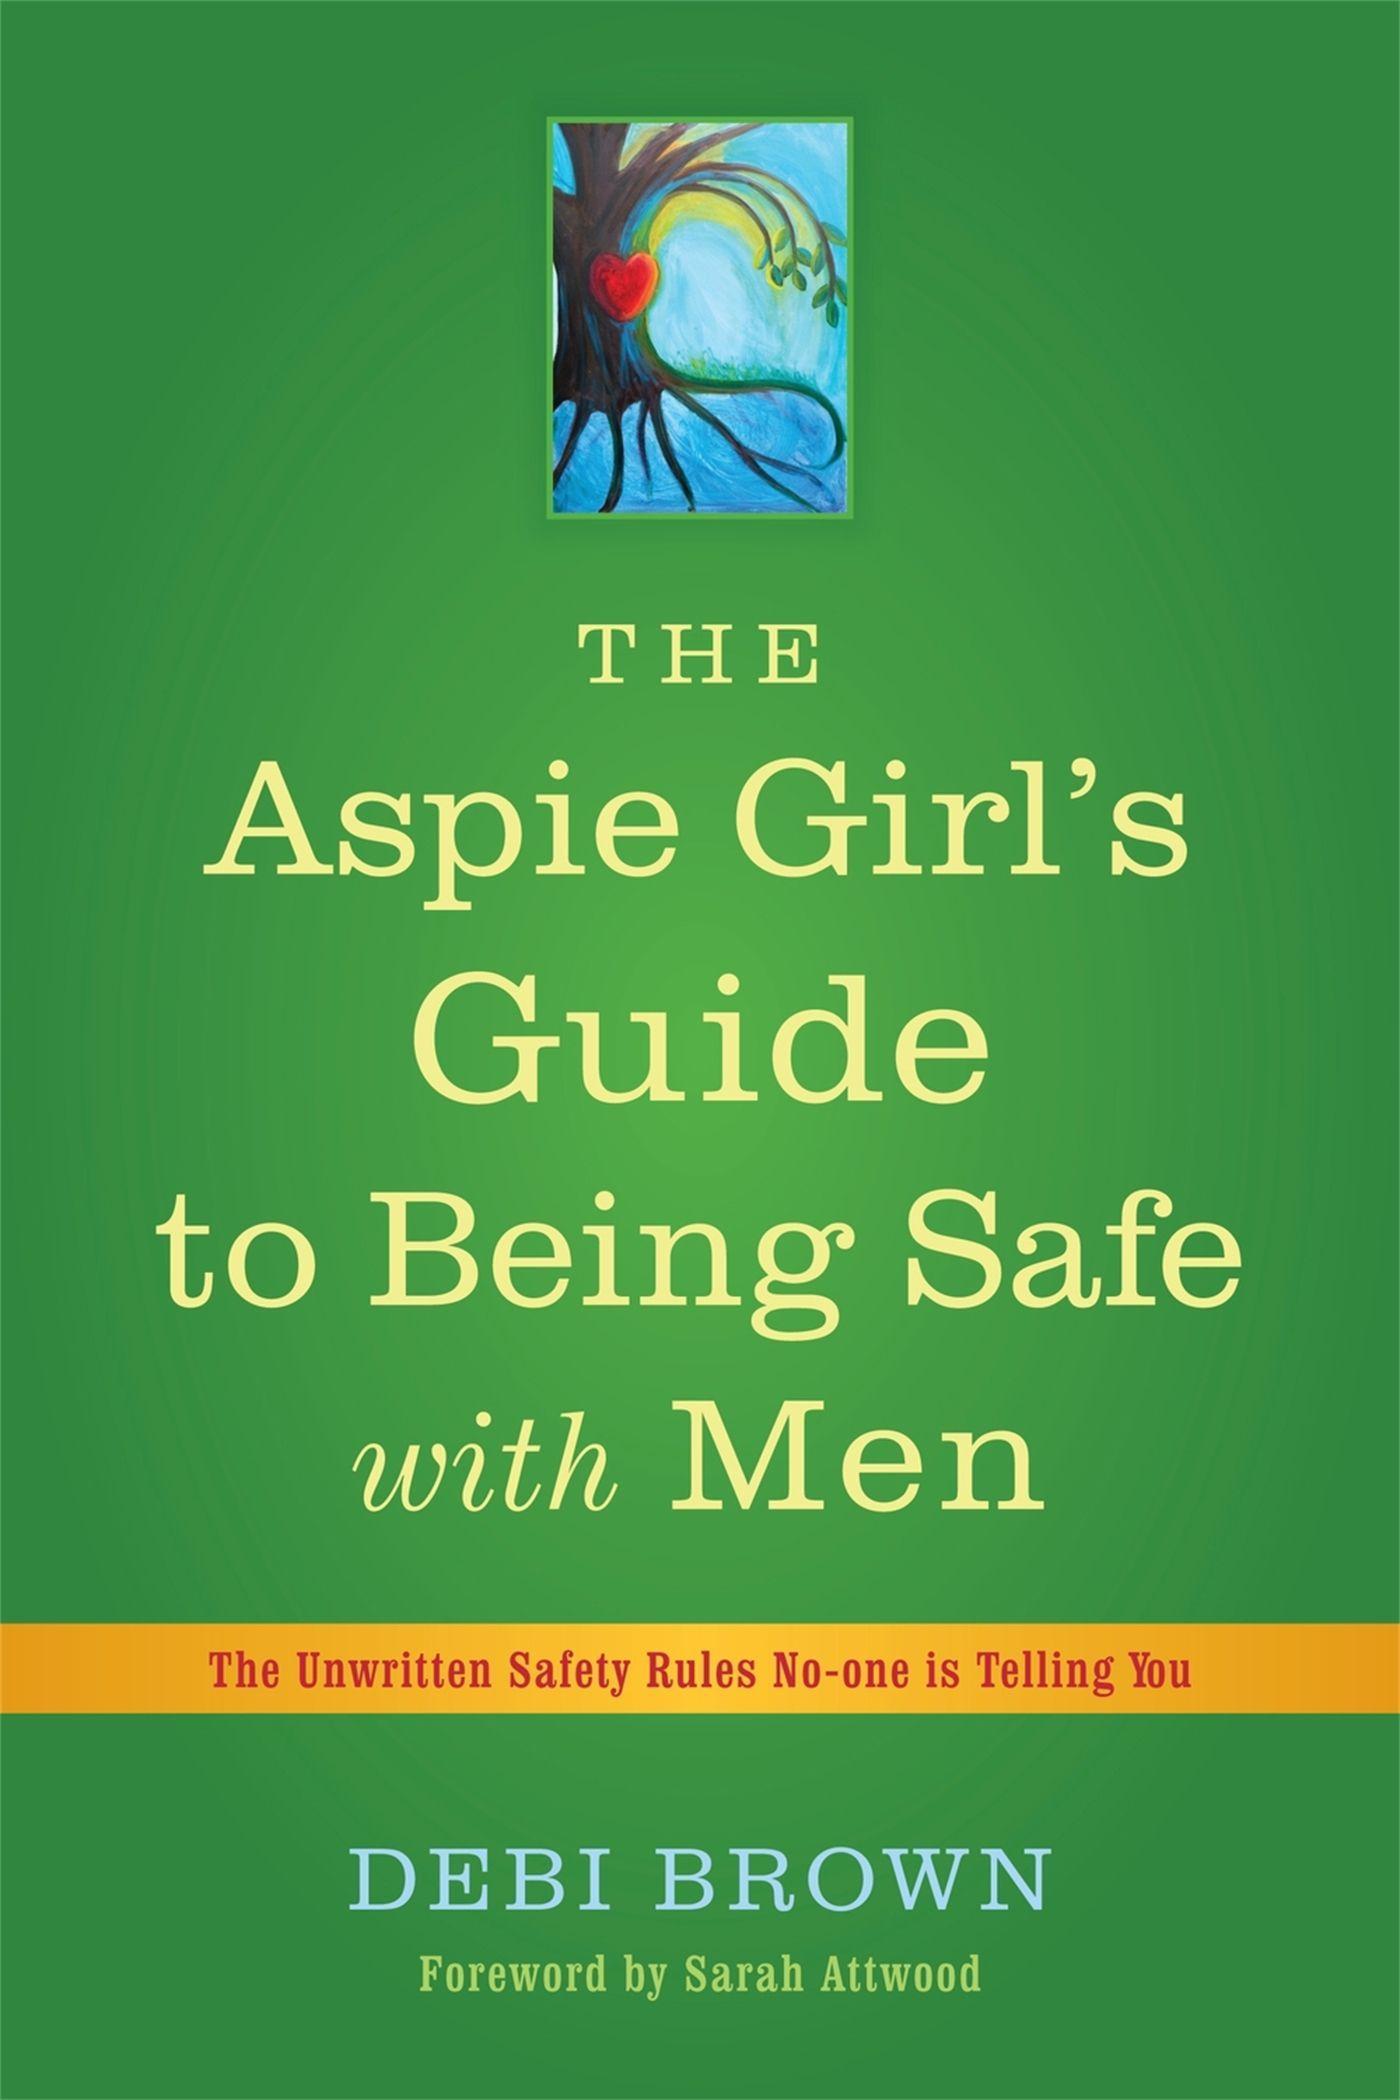 The Aspie Girl's Guide to Being Safe with Men / The Unwritten Safety Rules No-one is Telling You / Debi Brown / Taschenbuch / Kartoniert / Broschiert / Englisch / 2012 / Jessica Kingsley Publishers - Brown, Debi